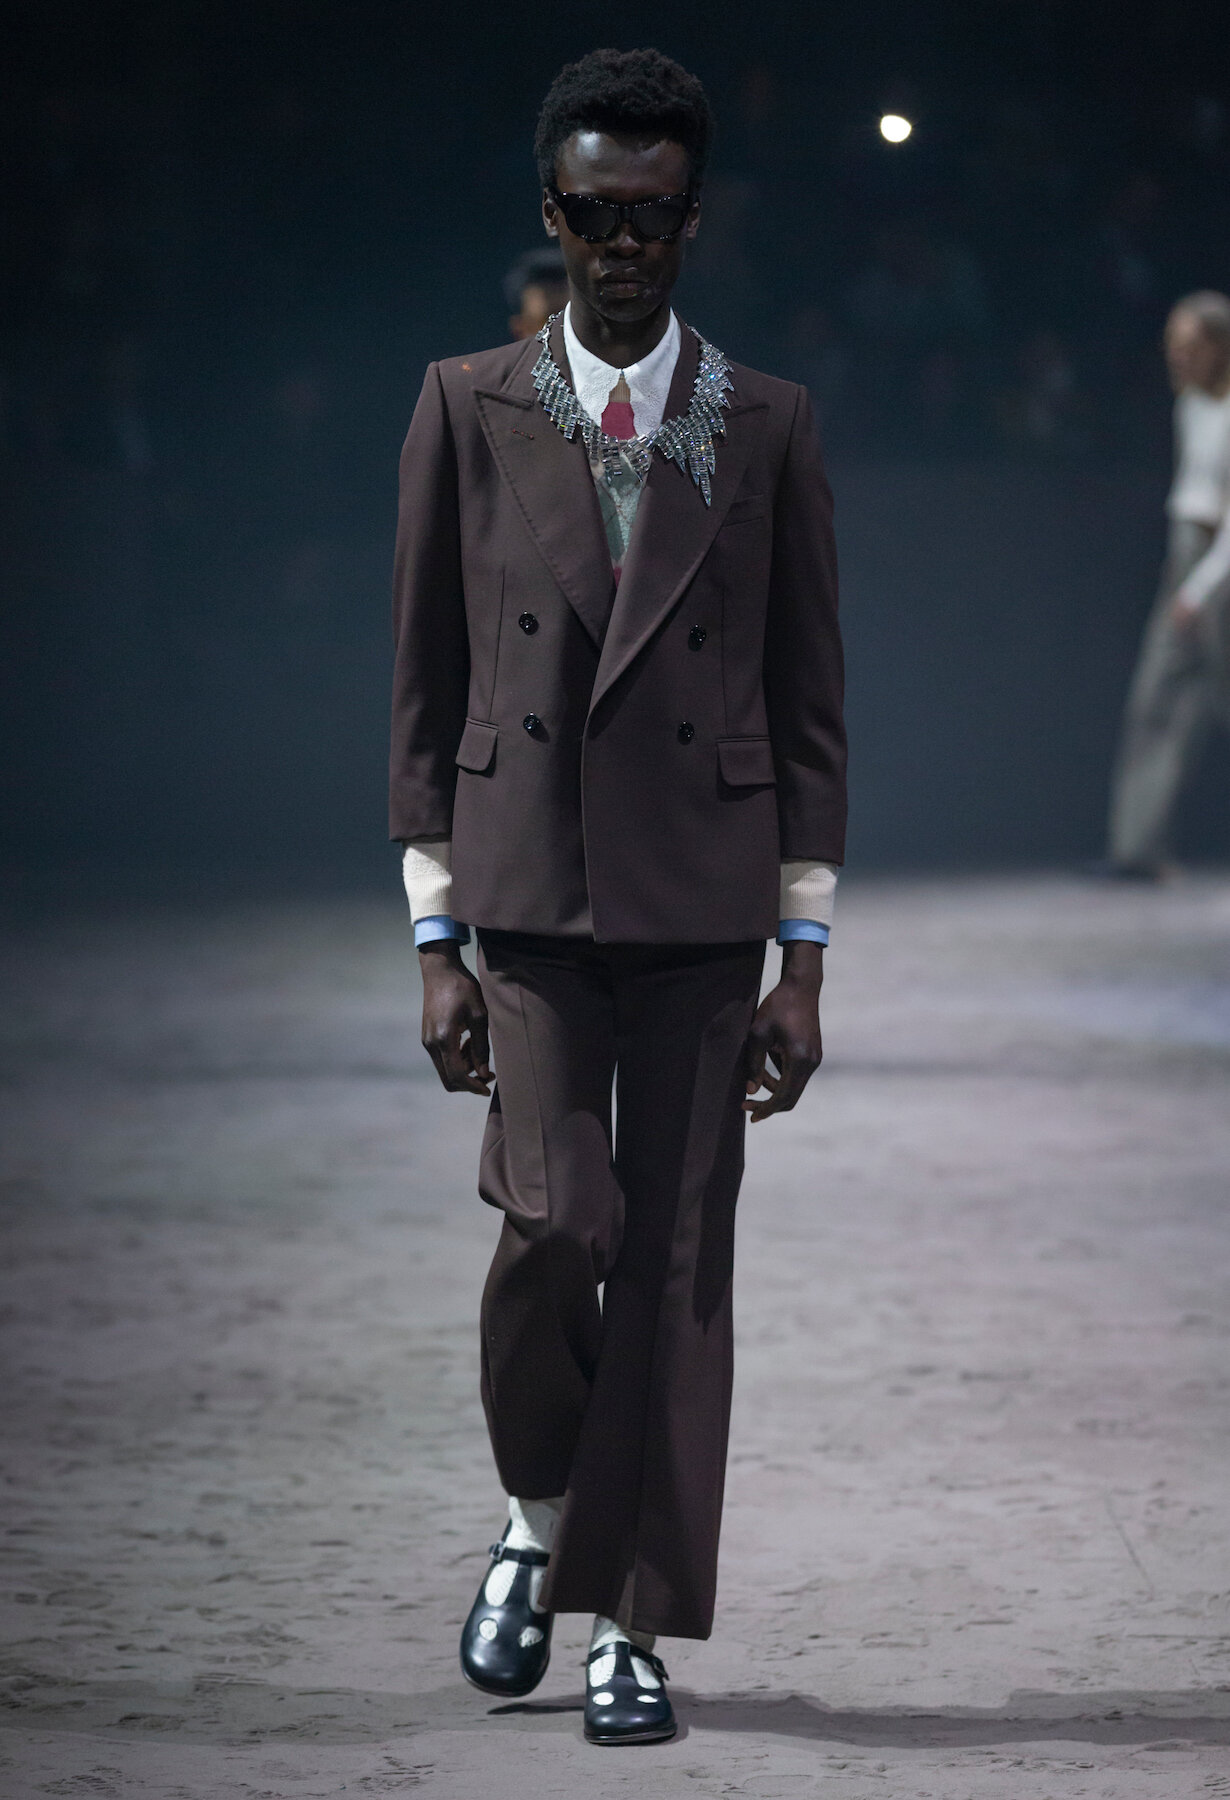 Gucci Fall Winter 2020 Men_s Collection (Look 10).jpg